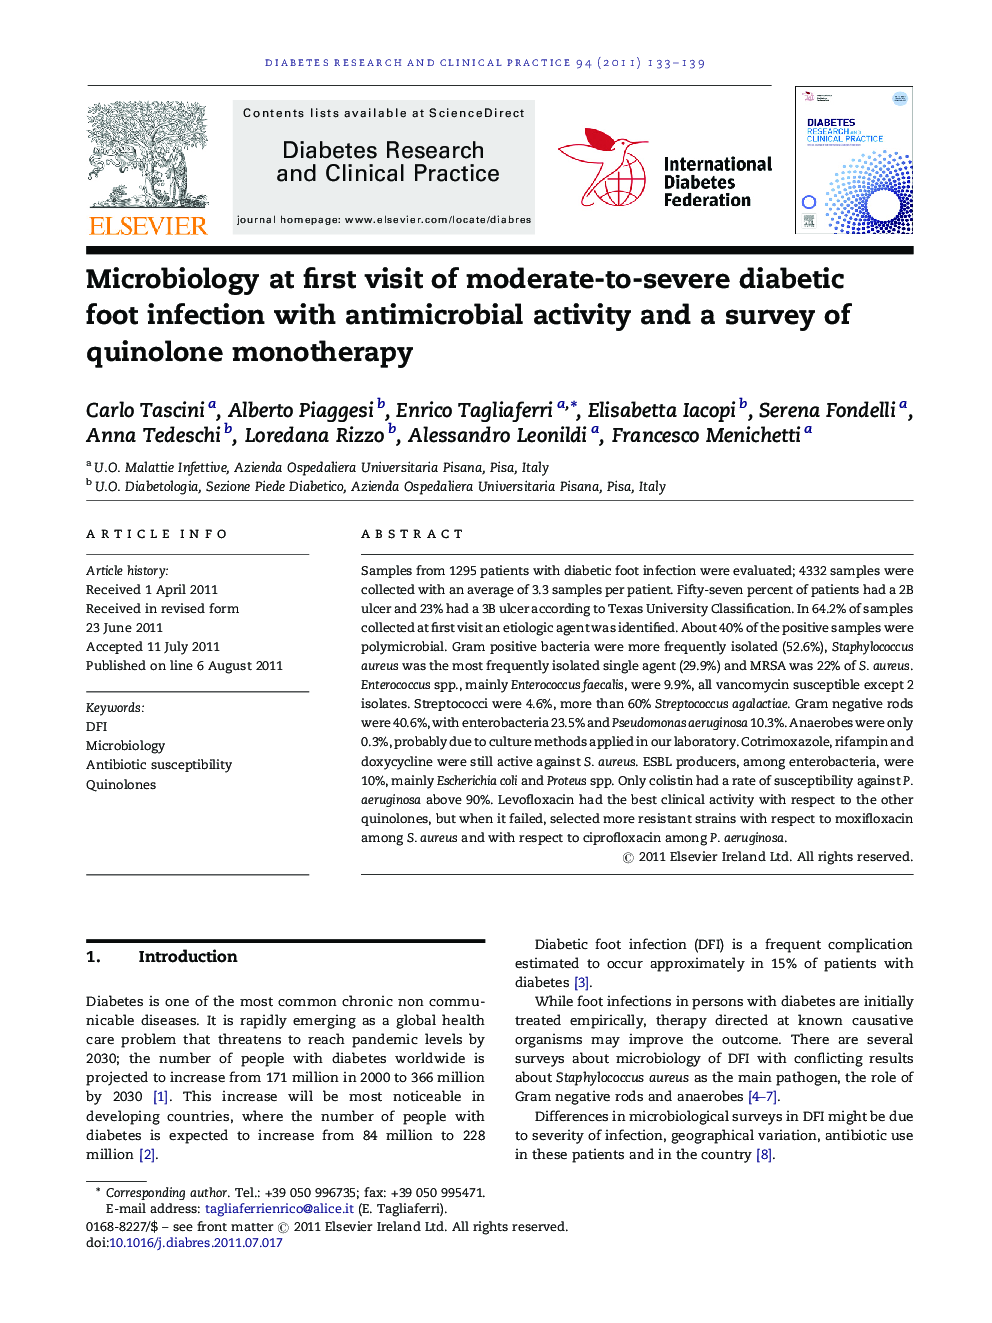 Microbiology at first visit of moderate-to-severe diabetic foot infection with antimicrobial activity and a survey of quinolone monotherapy